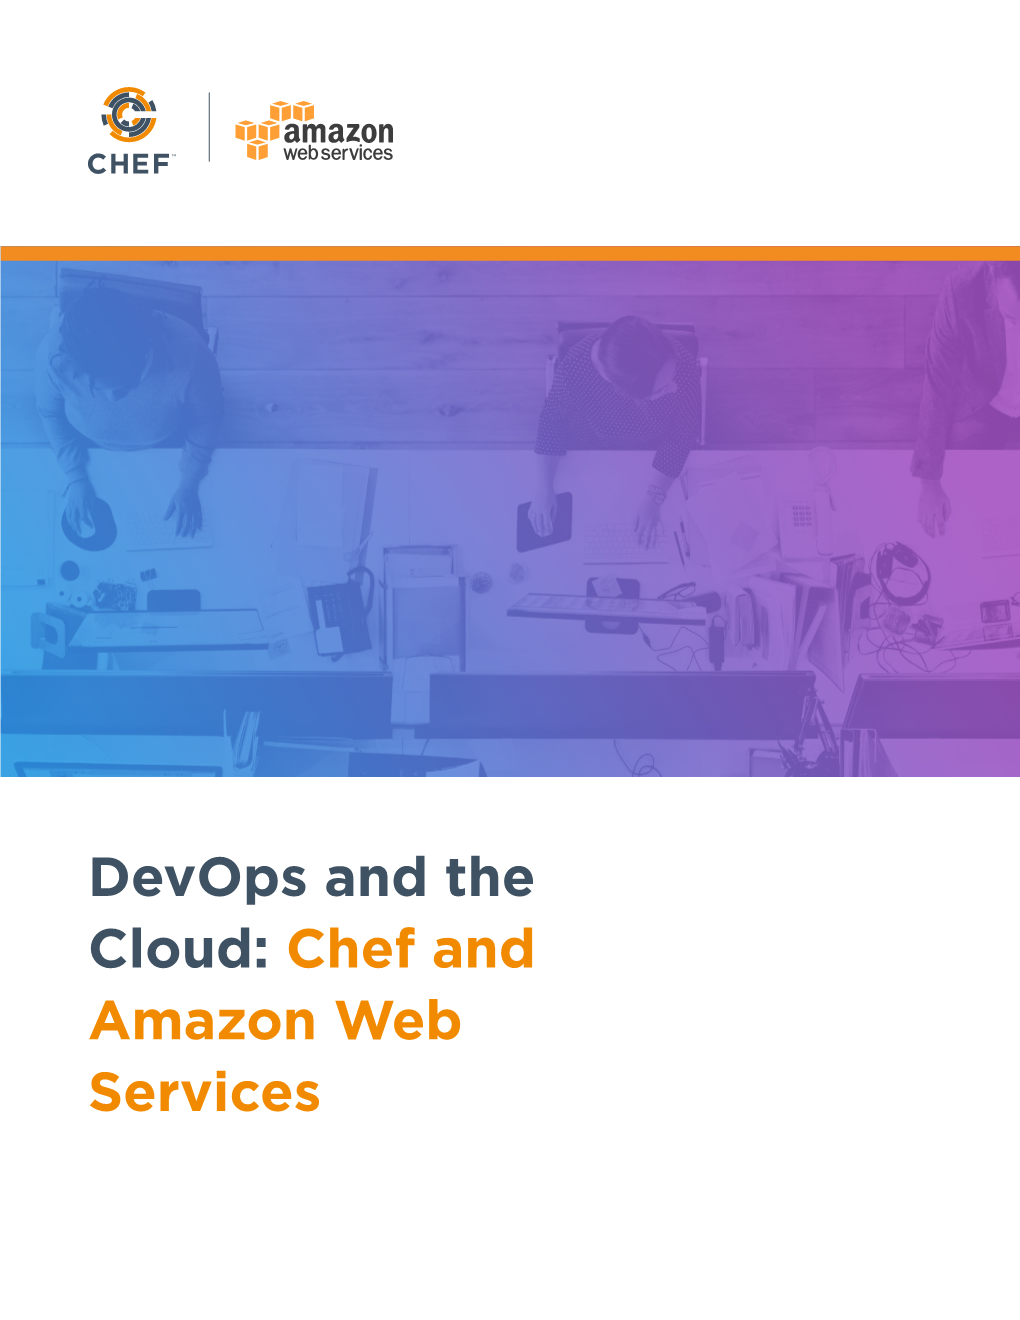 Devops and the Cloud: Chef and Amazon Web Services Copyright © 2017 Chef Software, Inc